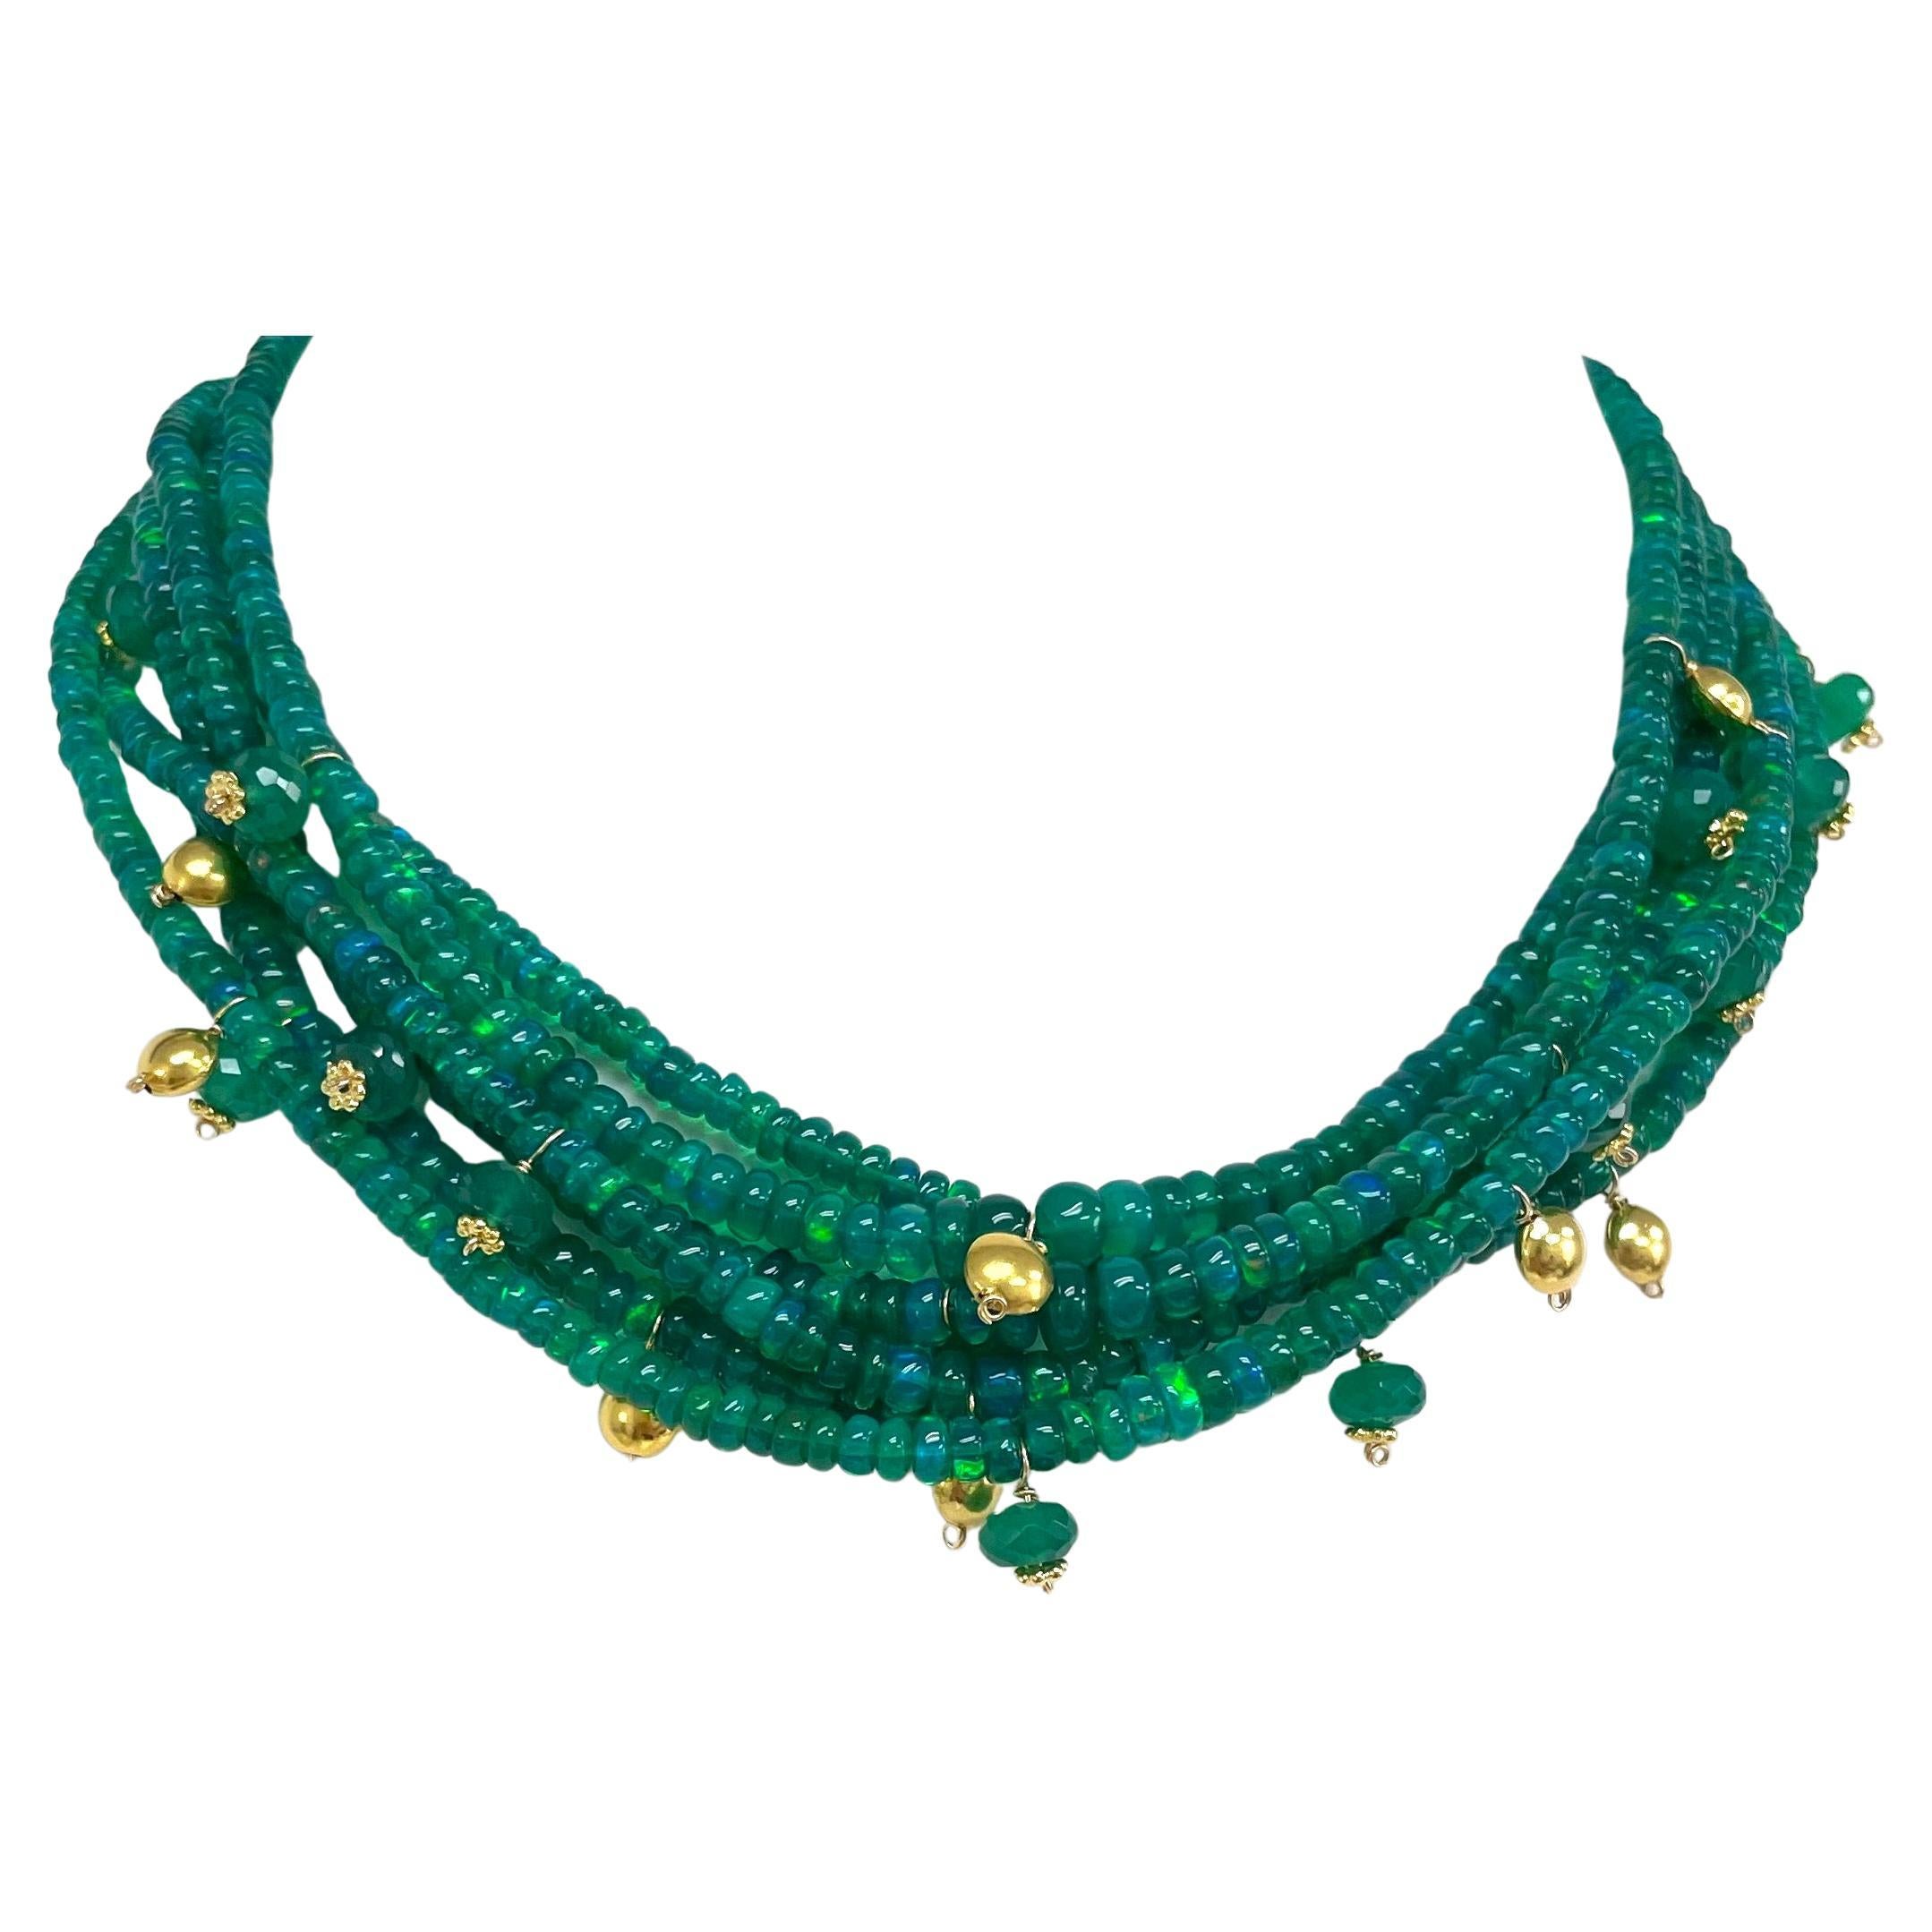 Description
Vibrant, luminous, iridescent green Hydrophane Ethiopian Opal 5 strand necklace embellished with lentil shape 18k yellow gold and green onyx accents.
Item # N3795. 
Check out complementary earrings, (see photo),  Item # E3080 ($4,000)